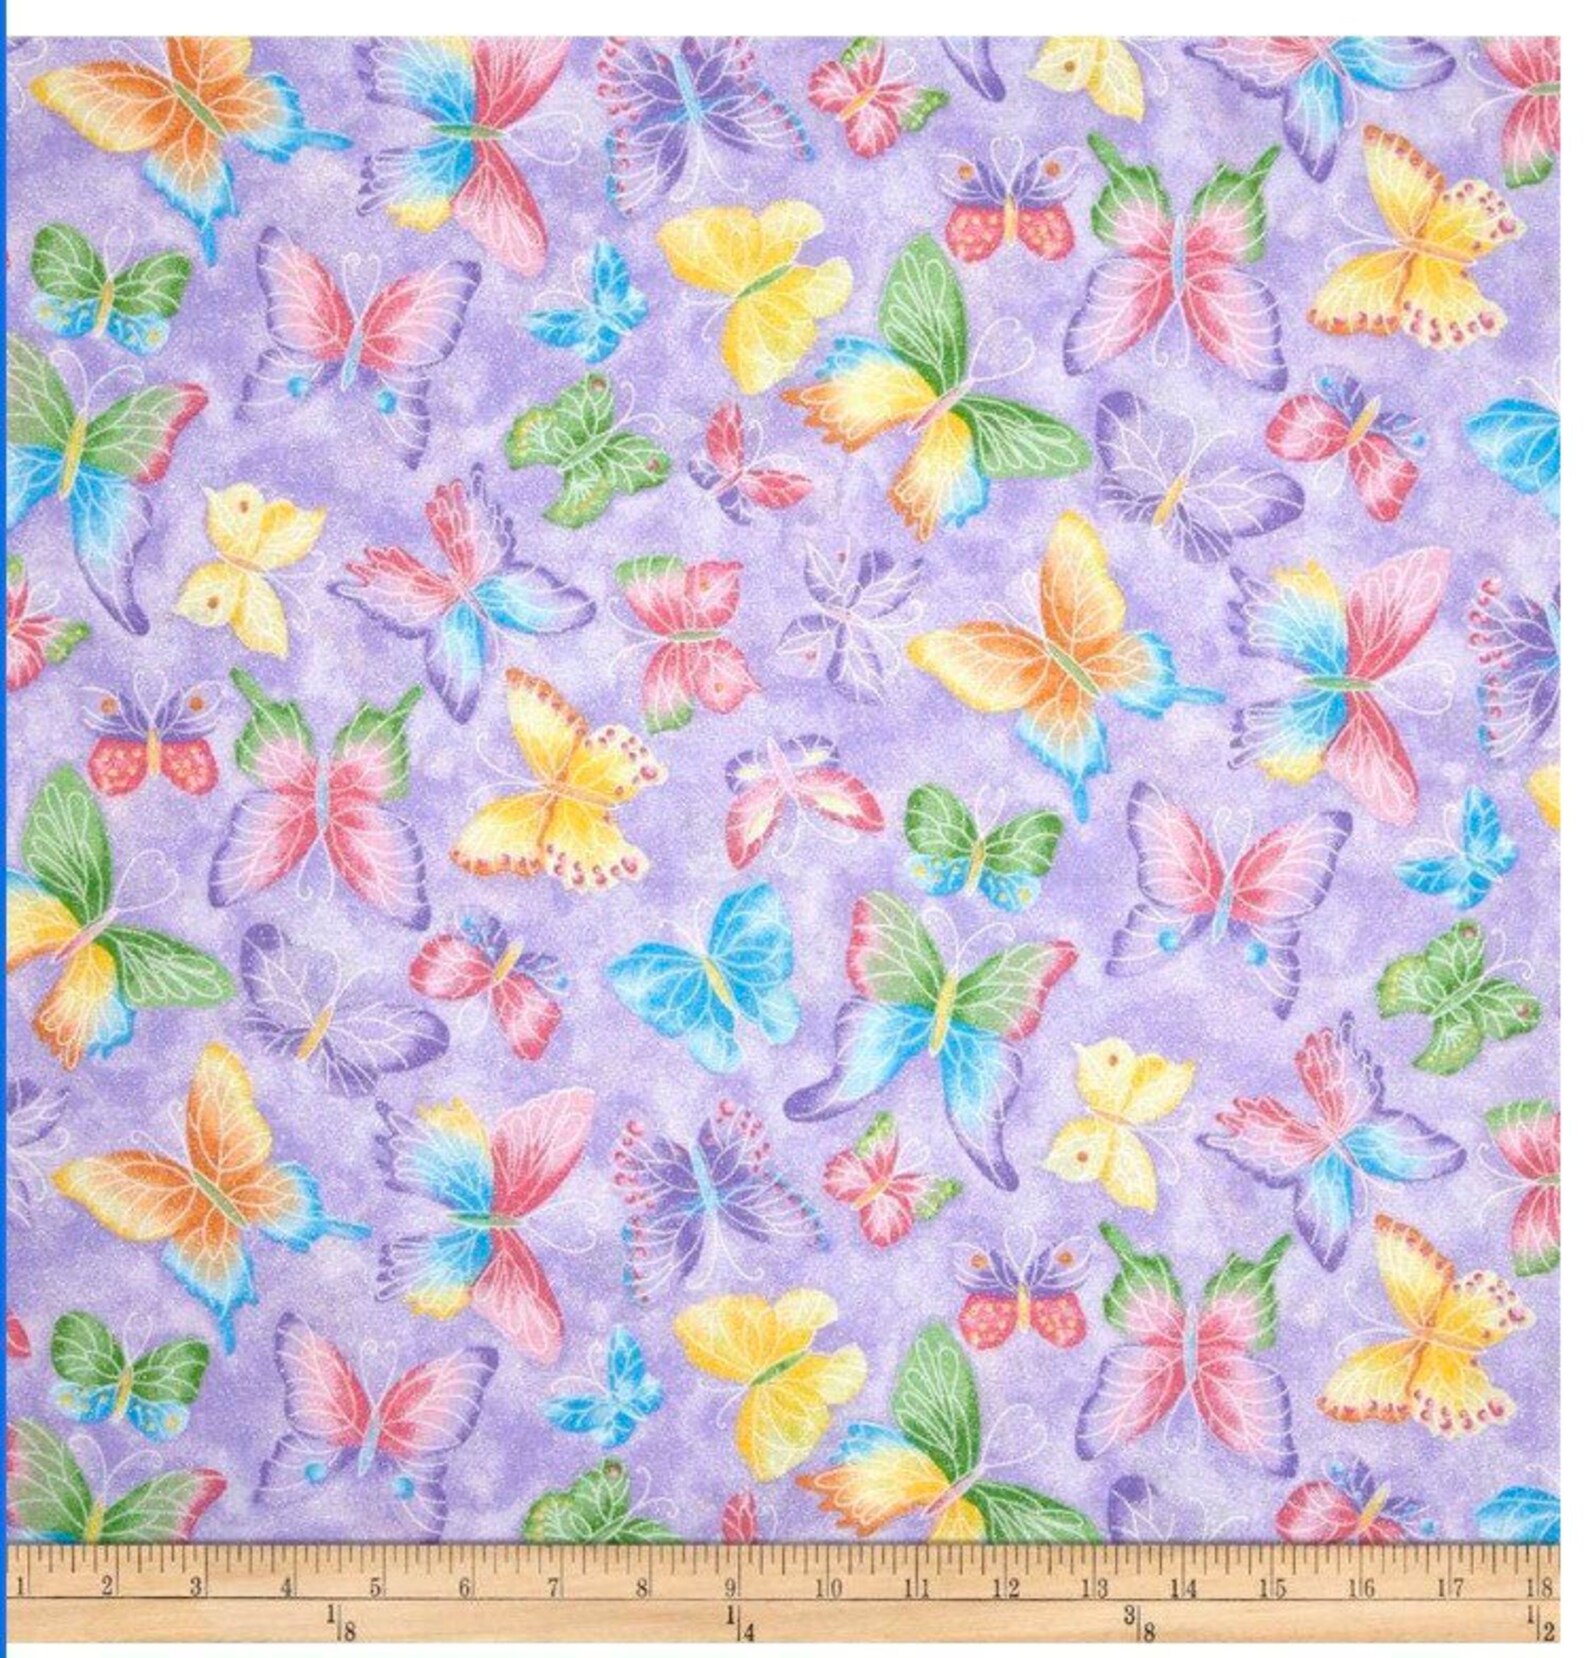 Butterfly Fabric Butterfly Fabric by the Yard Butterfly | Etsy